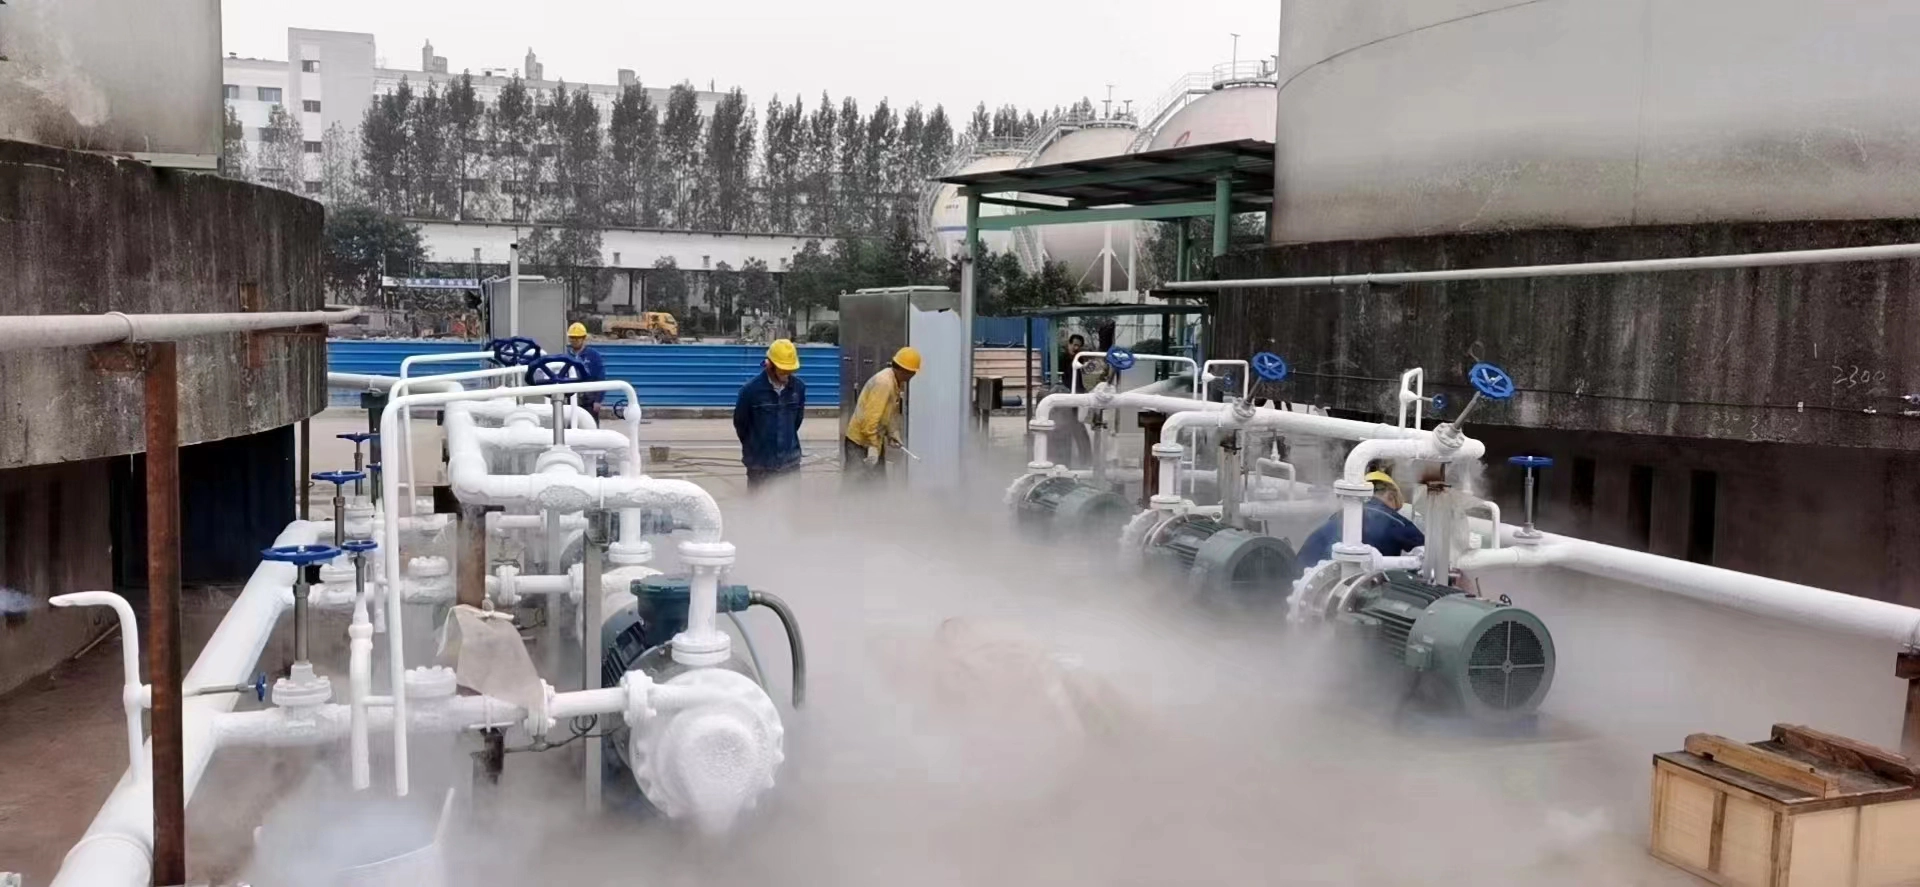 Sanjing Cryogenic Equipment Centrifugal Pumps in operation